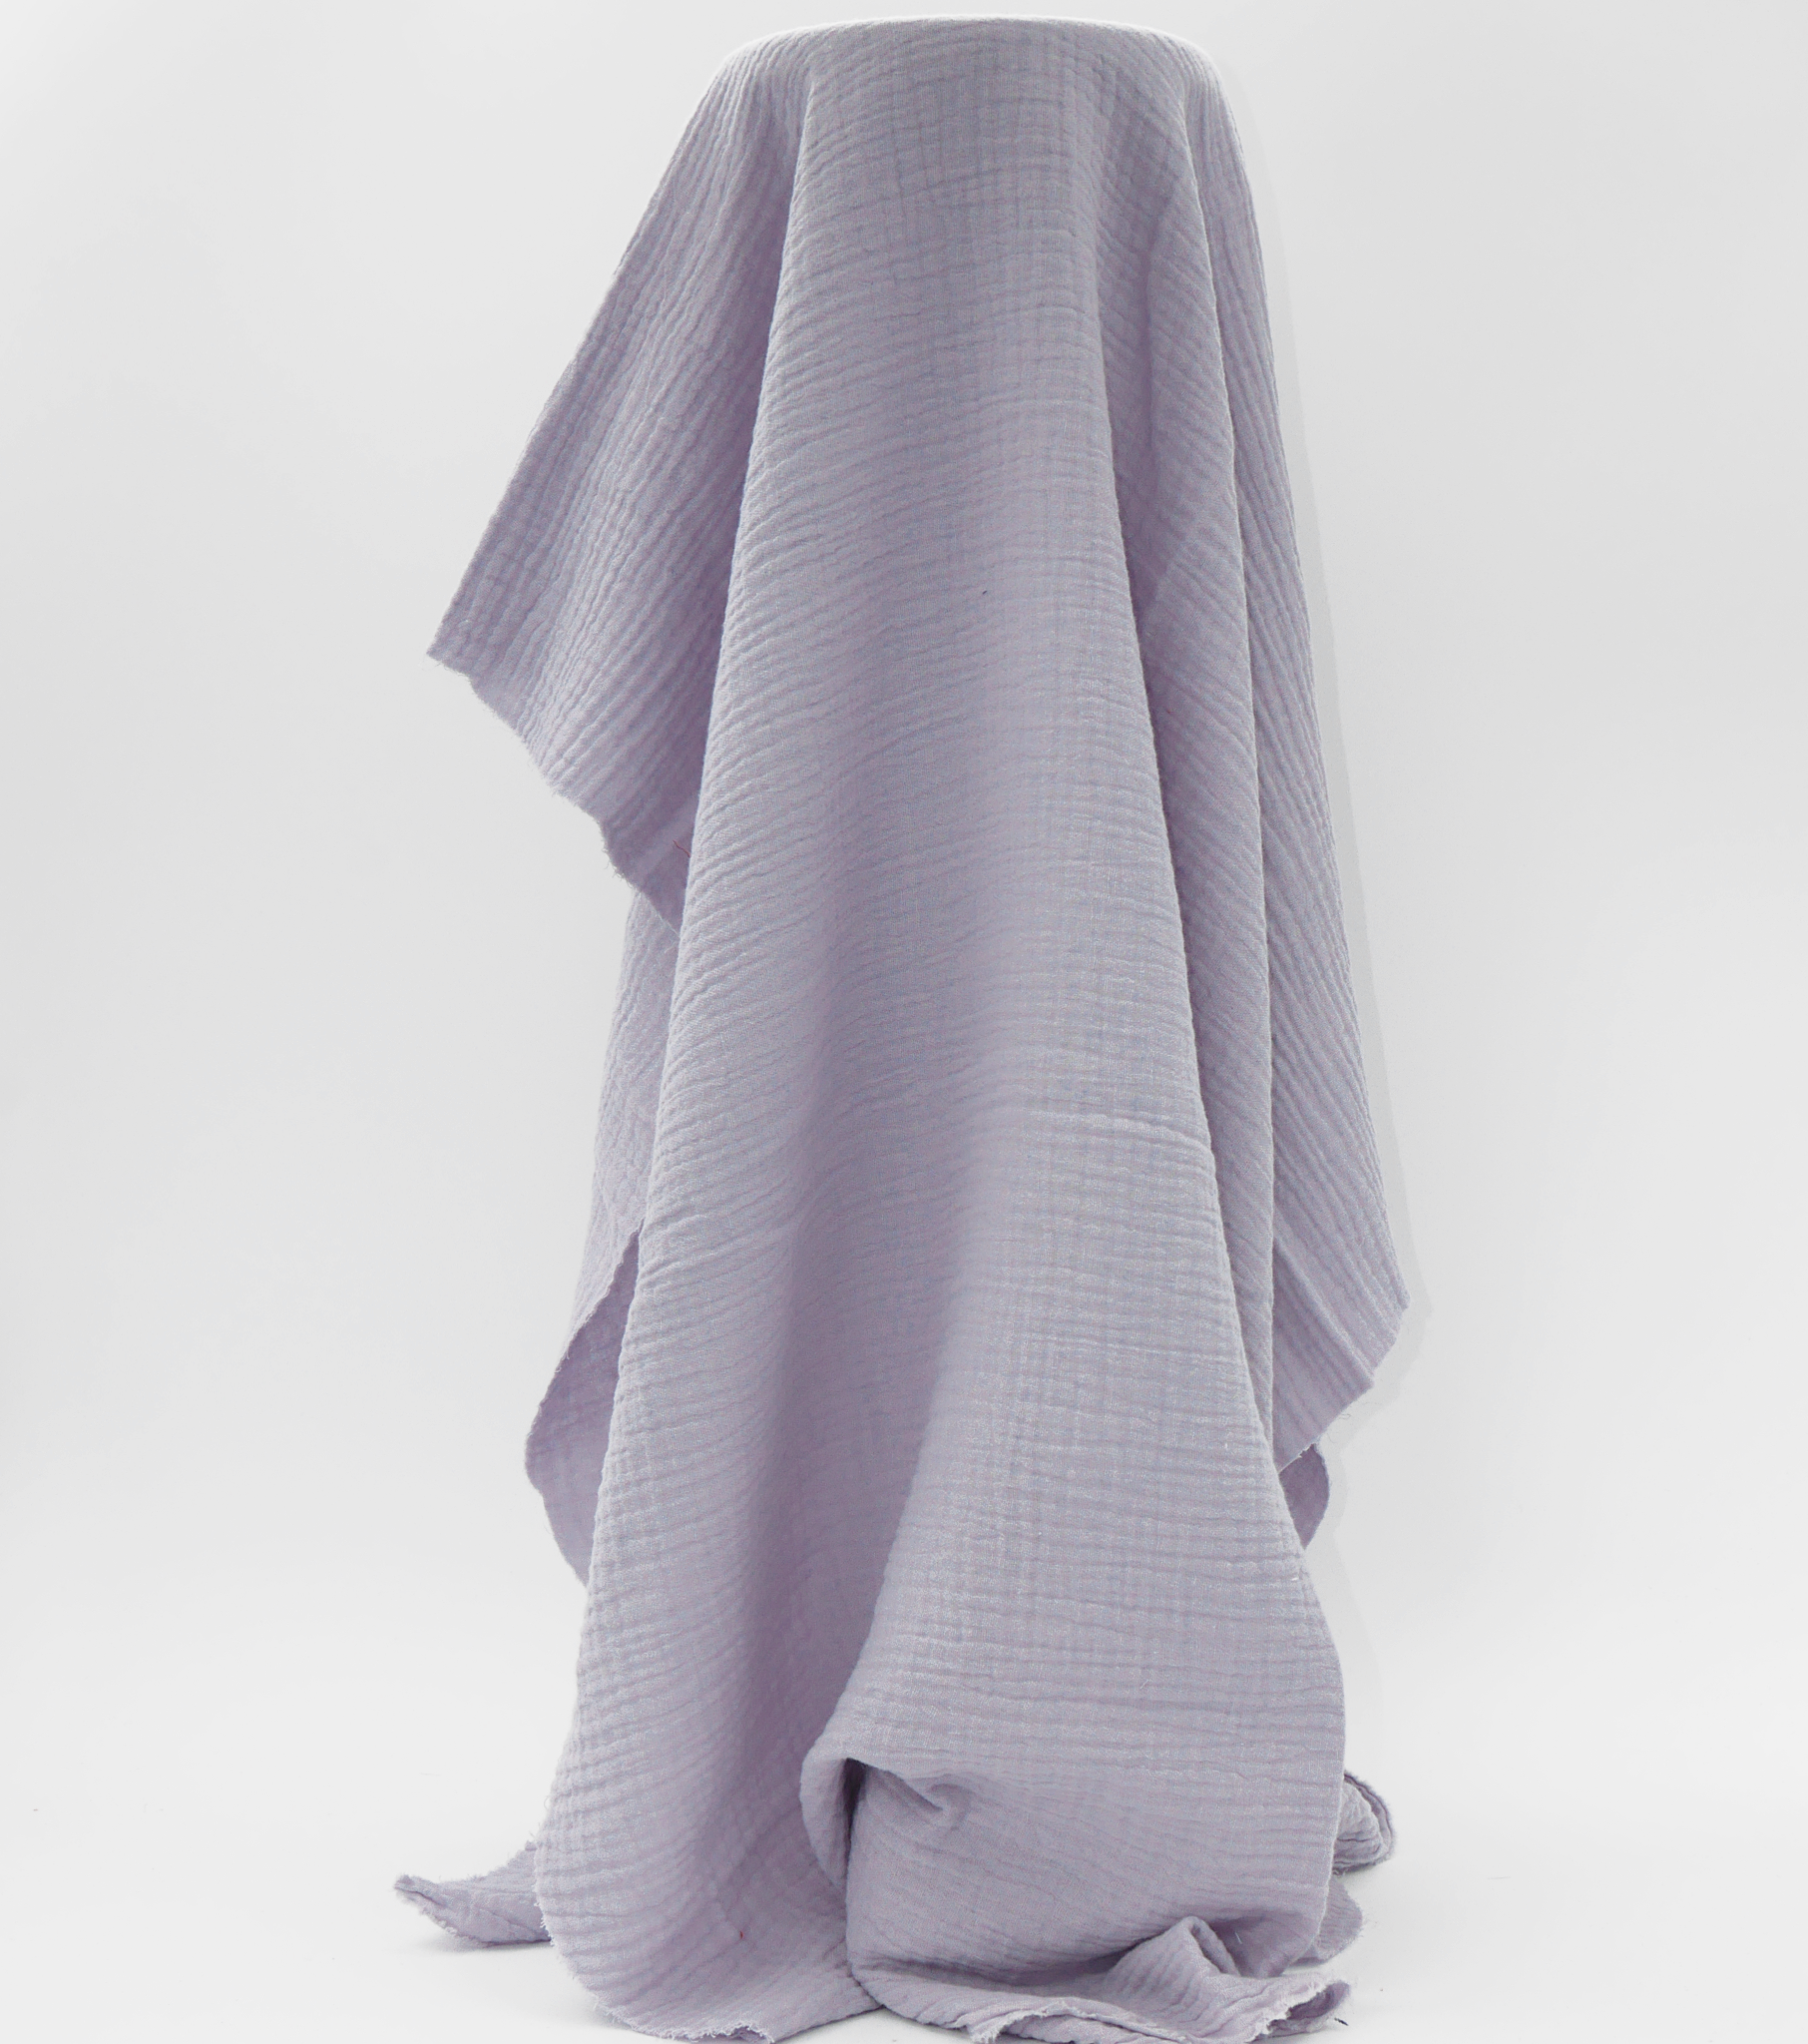 Double Muslin $14.00p/m - Orchid Bloom